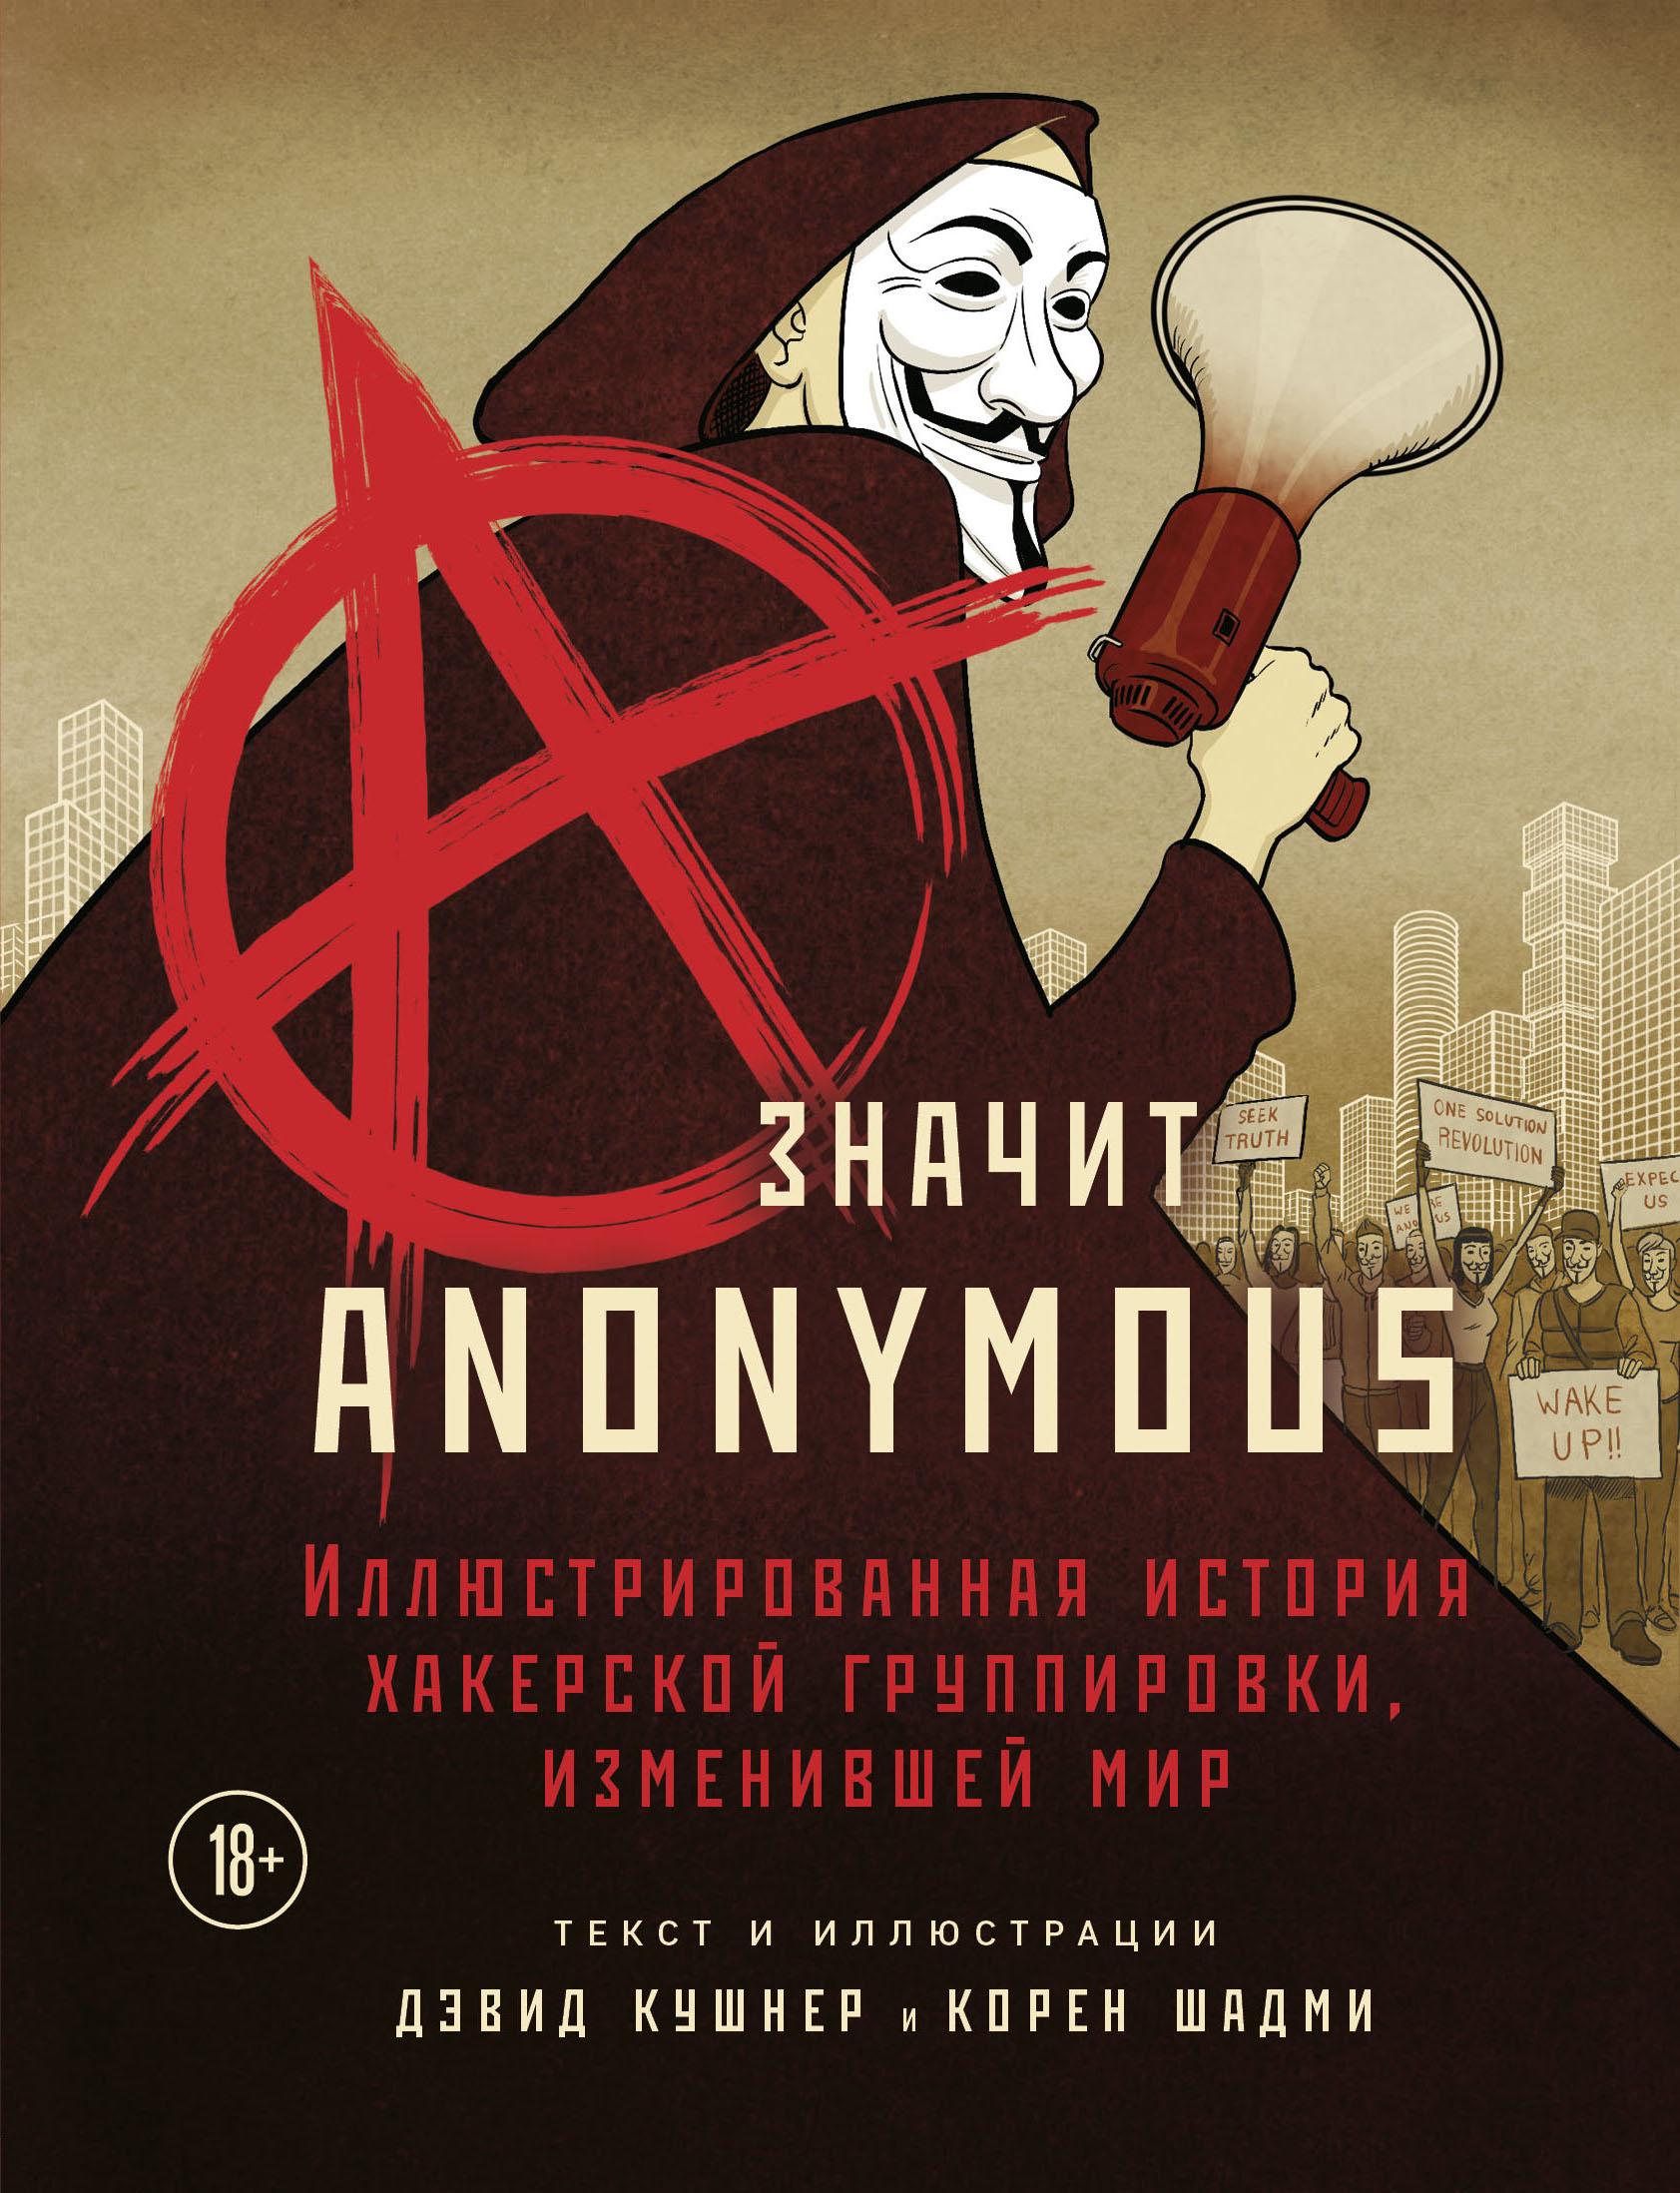  .,  . A -  Anonymous.    ,   